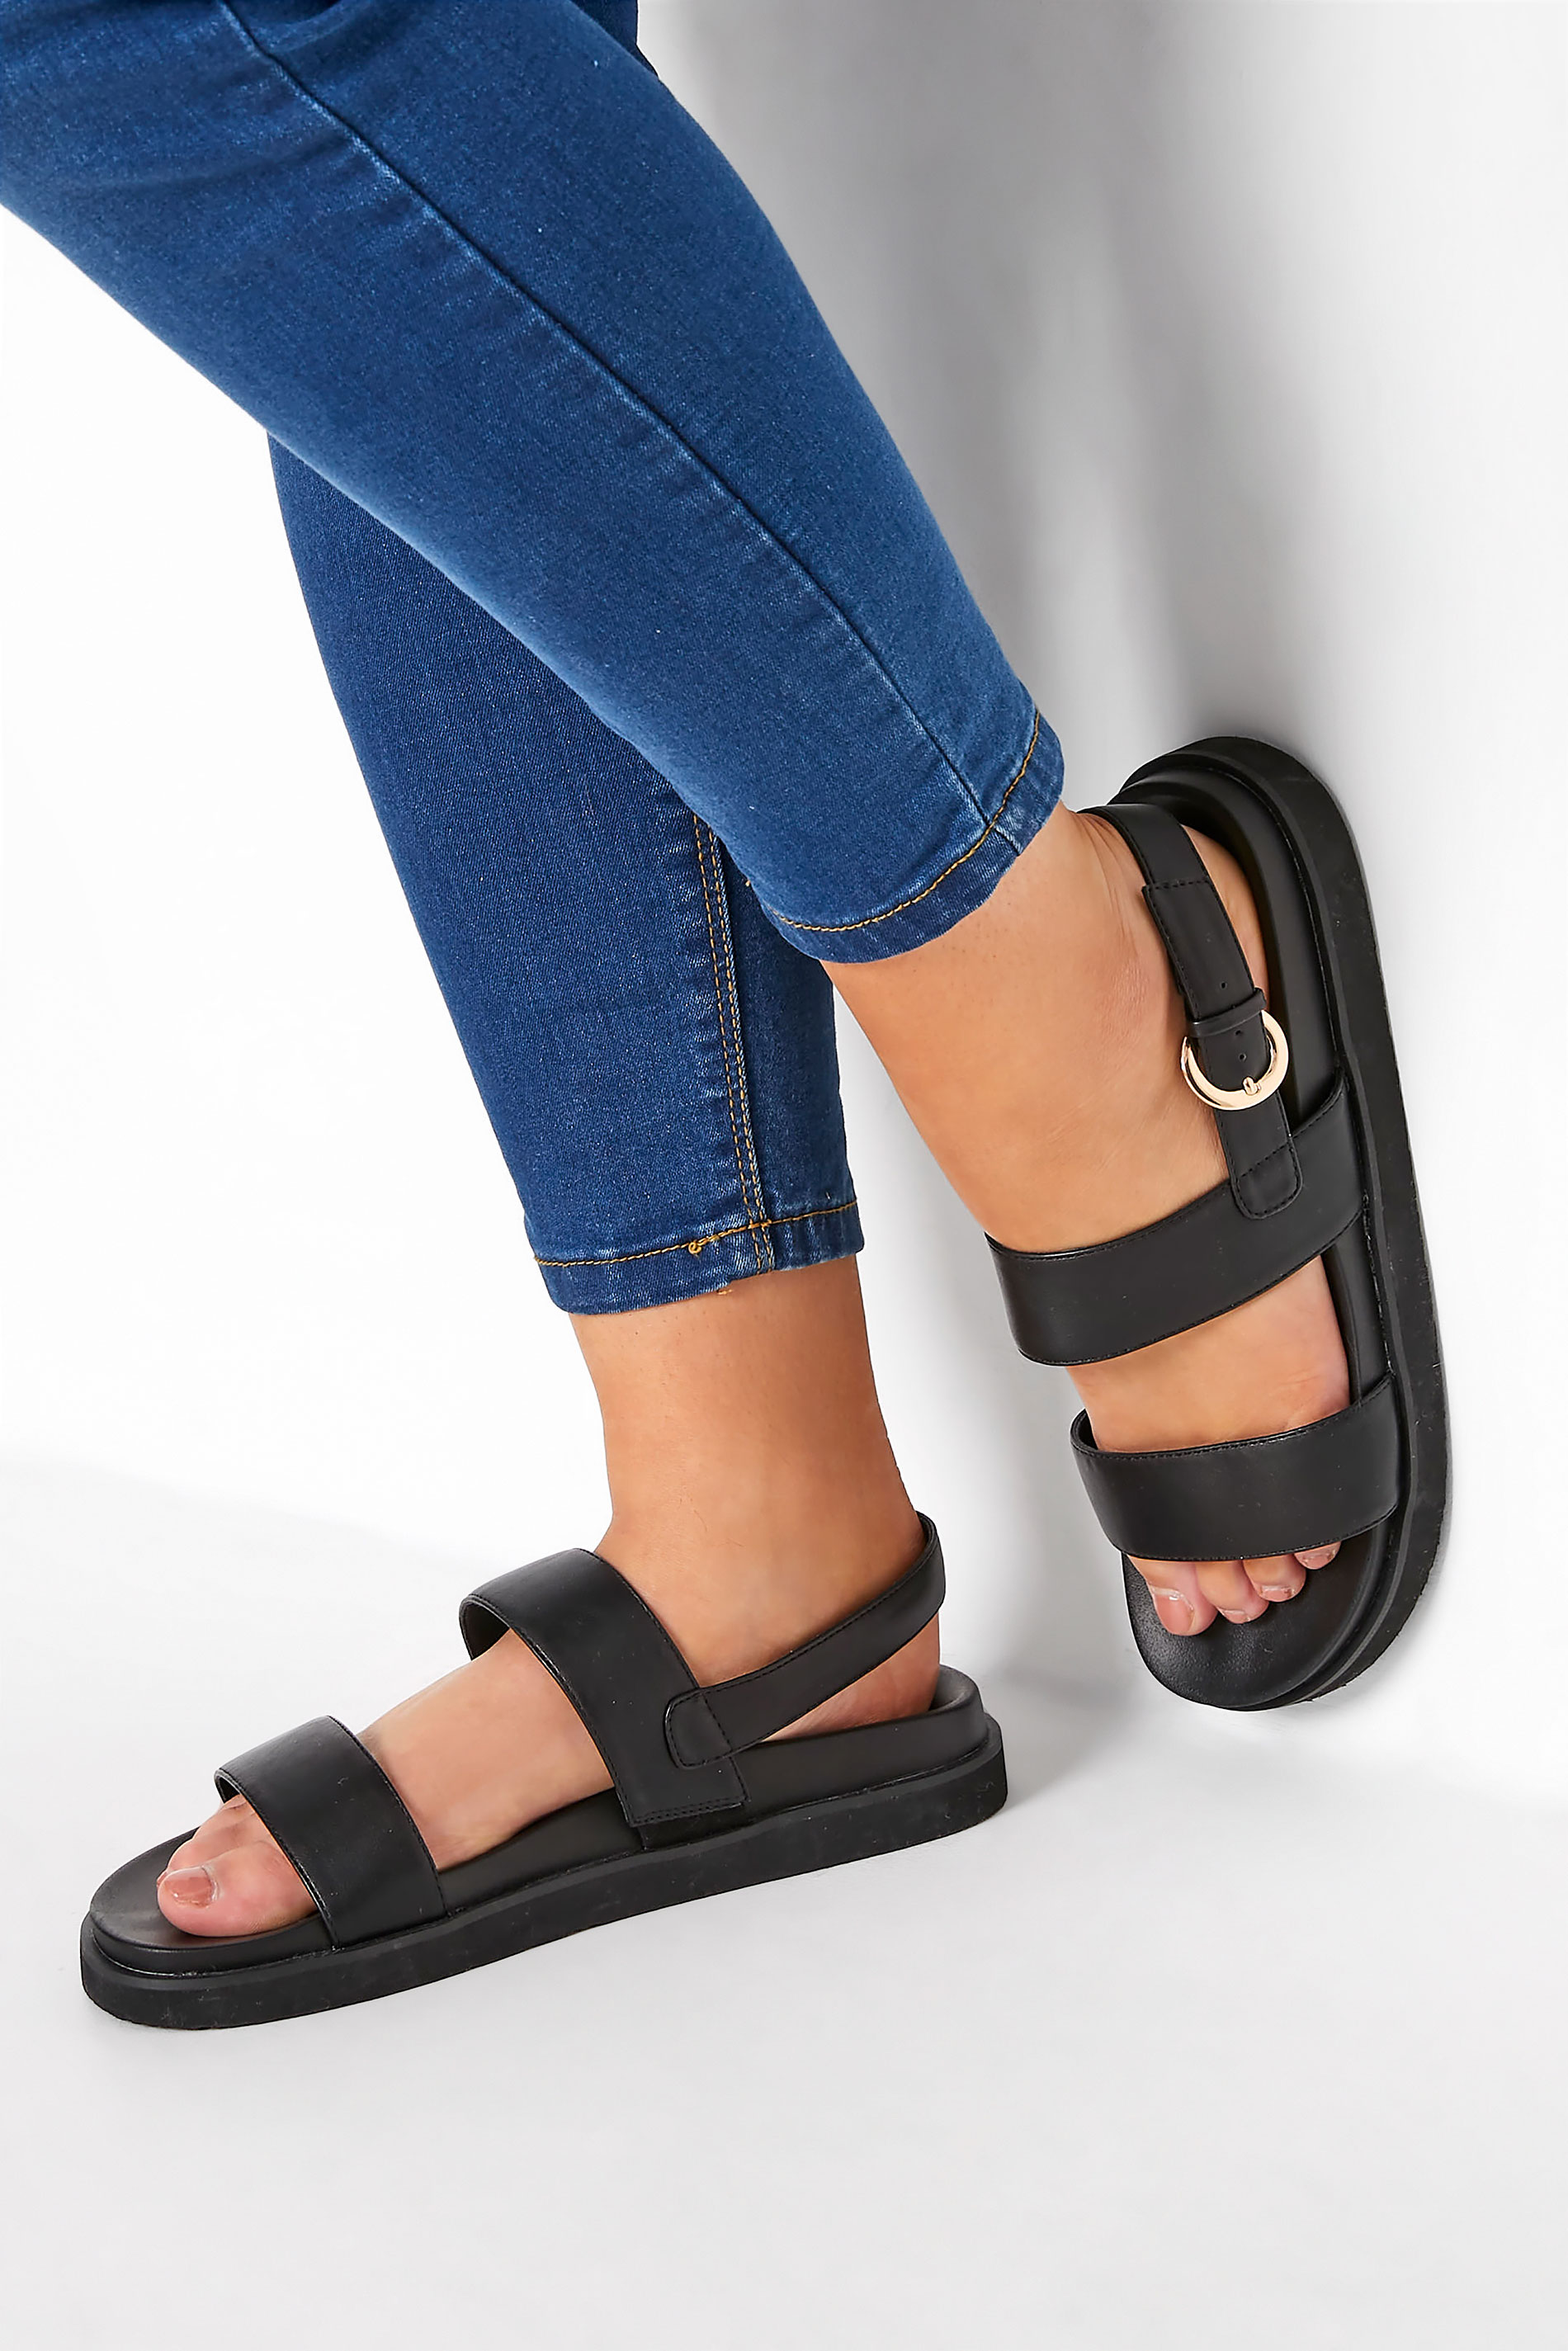 LIMITED COLLECTION Black Double Strap Chunky Sandals In Extra Wide EEE Fit_M.jpg